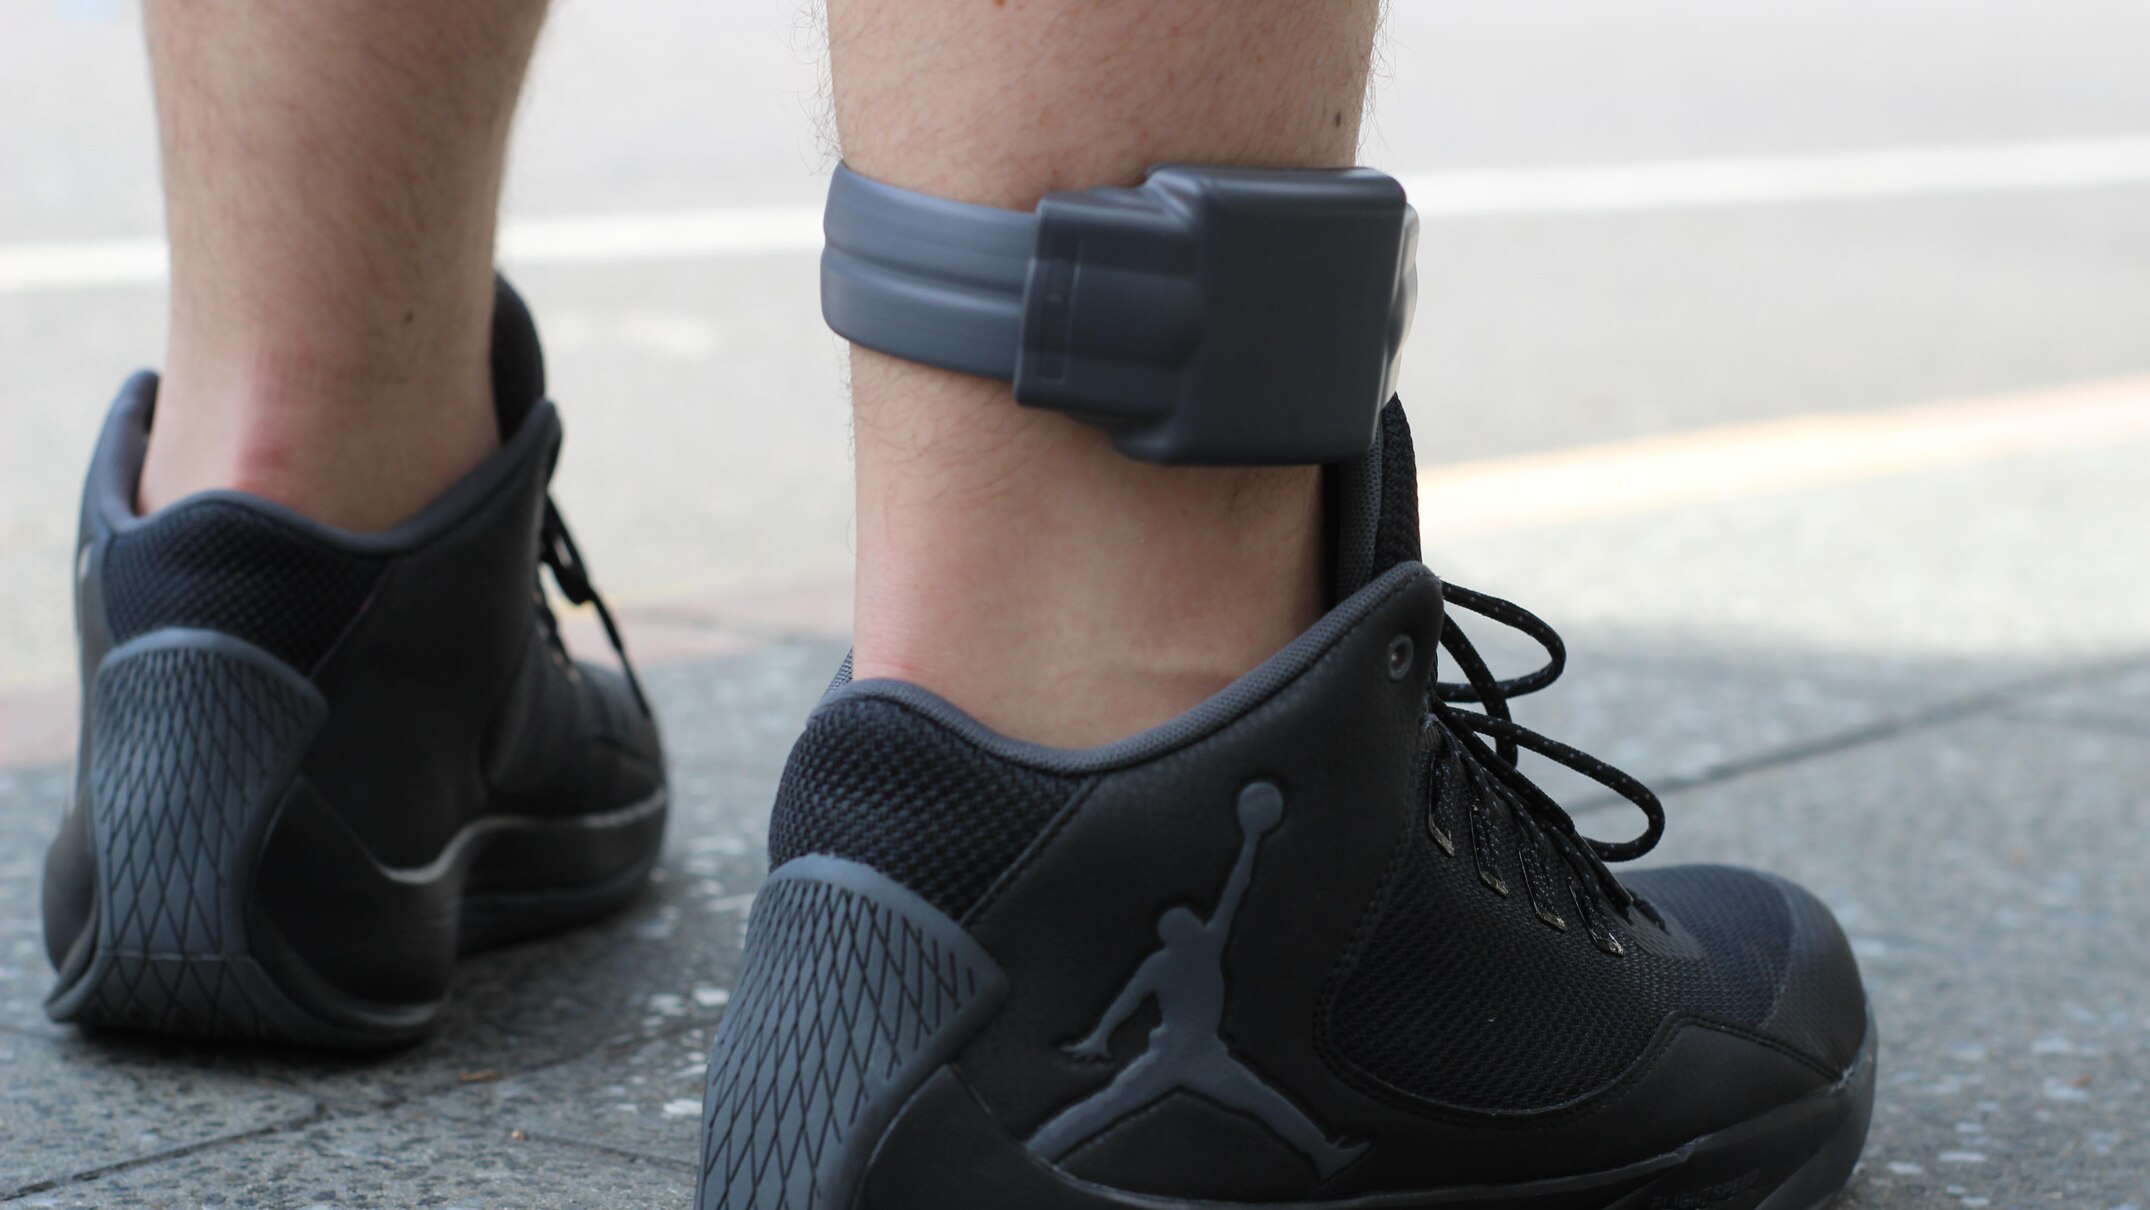 half of released detainees not wearing ankle bracelets, according to government report